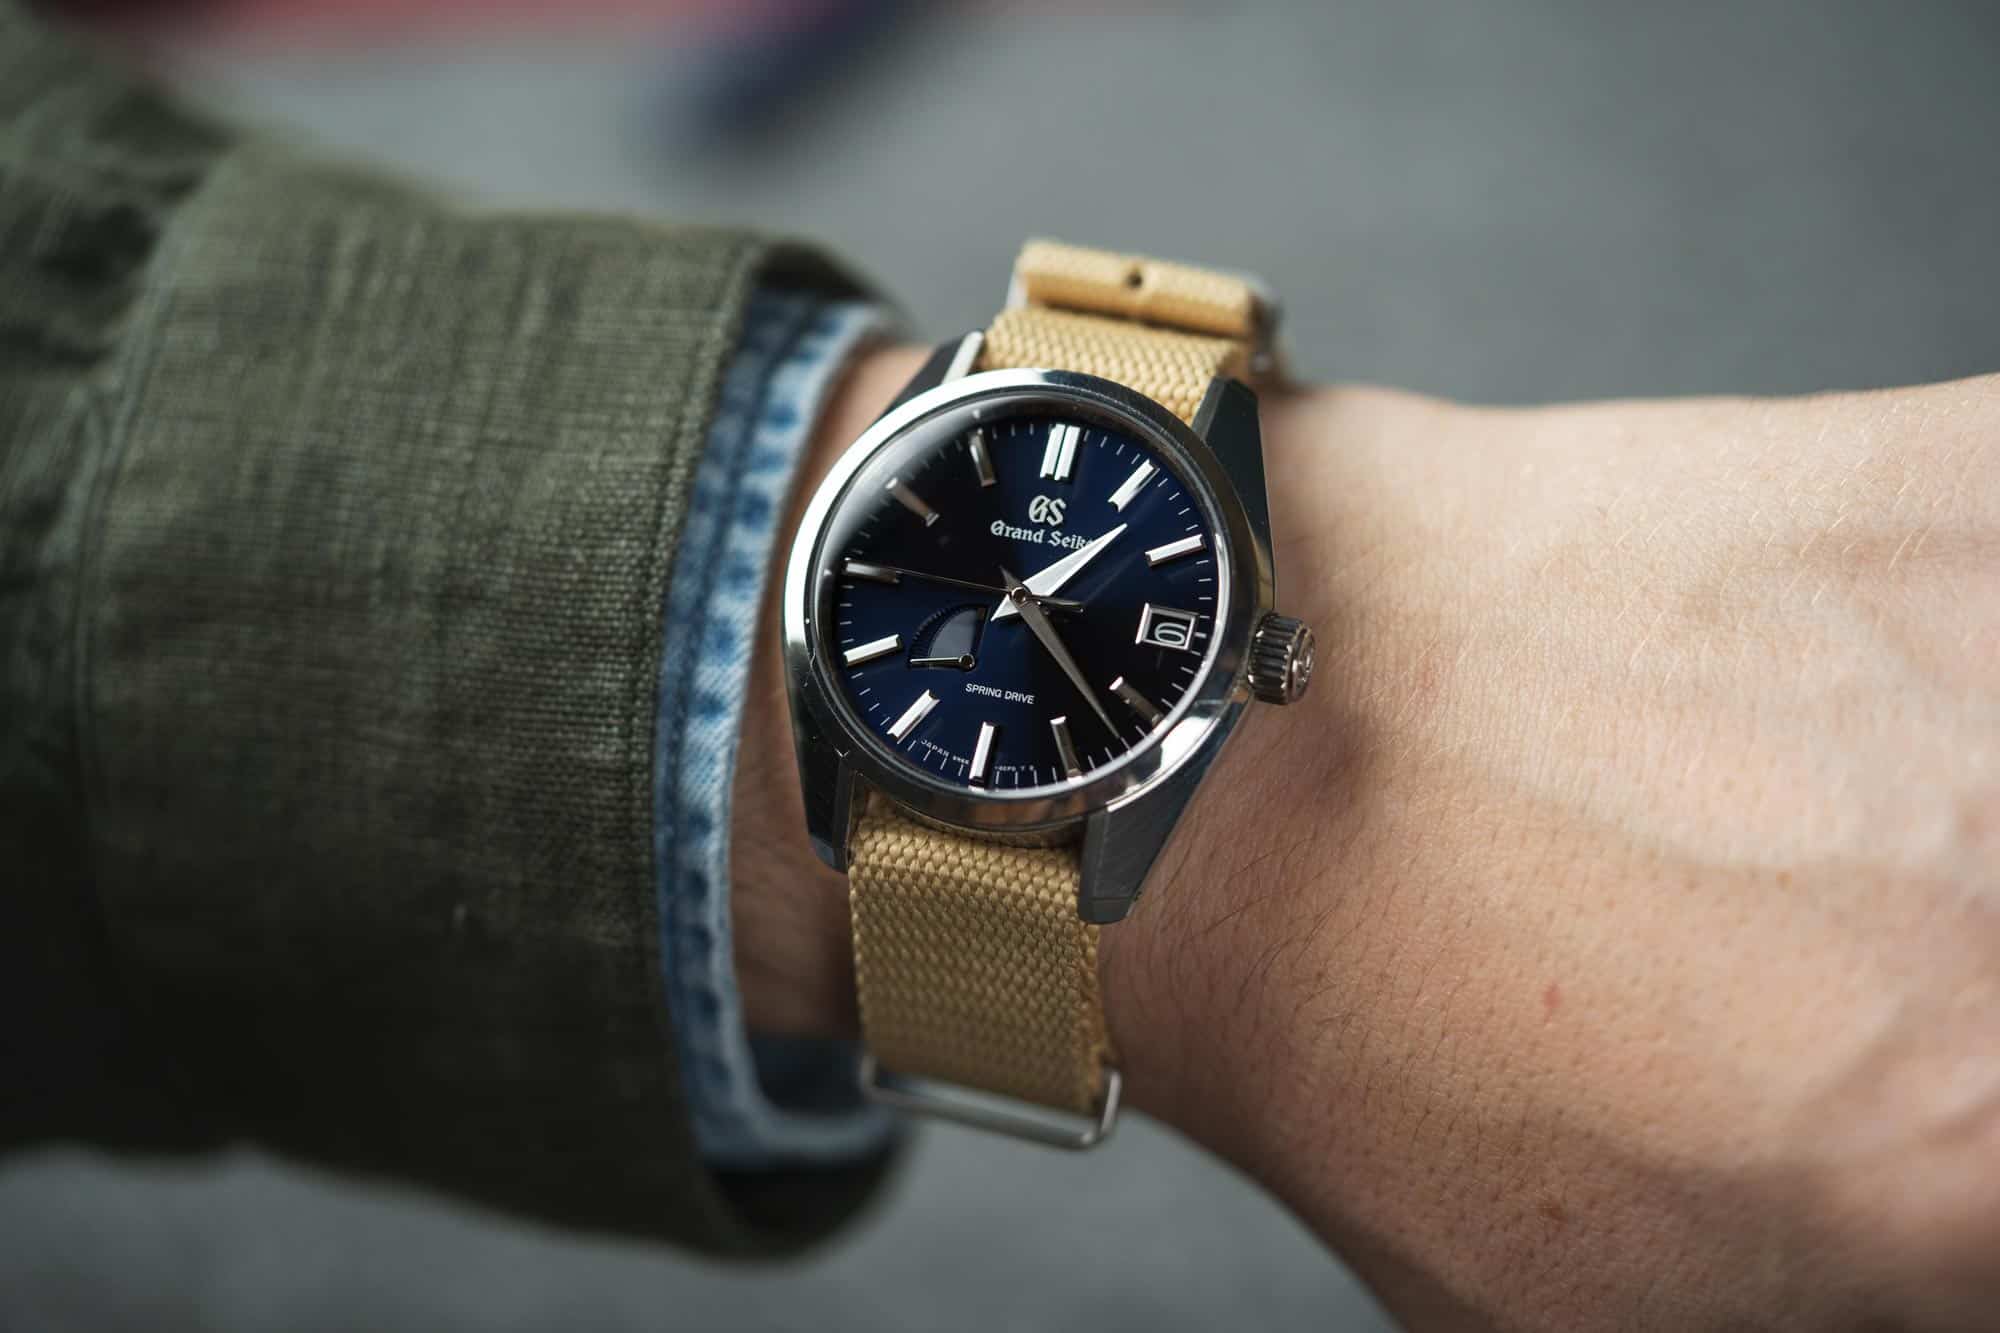 brutalt familie Tage med Owner's Review: The Grand Seiko SBGA375 [VIDEO] - Worn & Wound